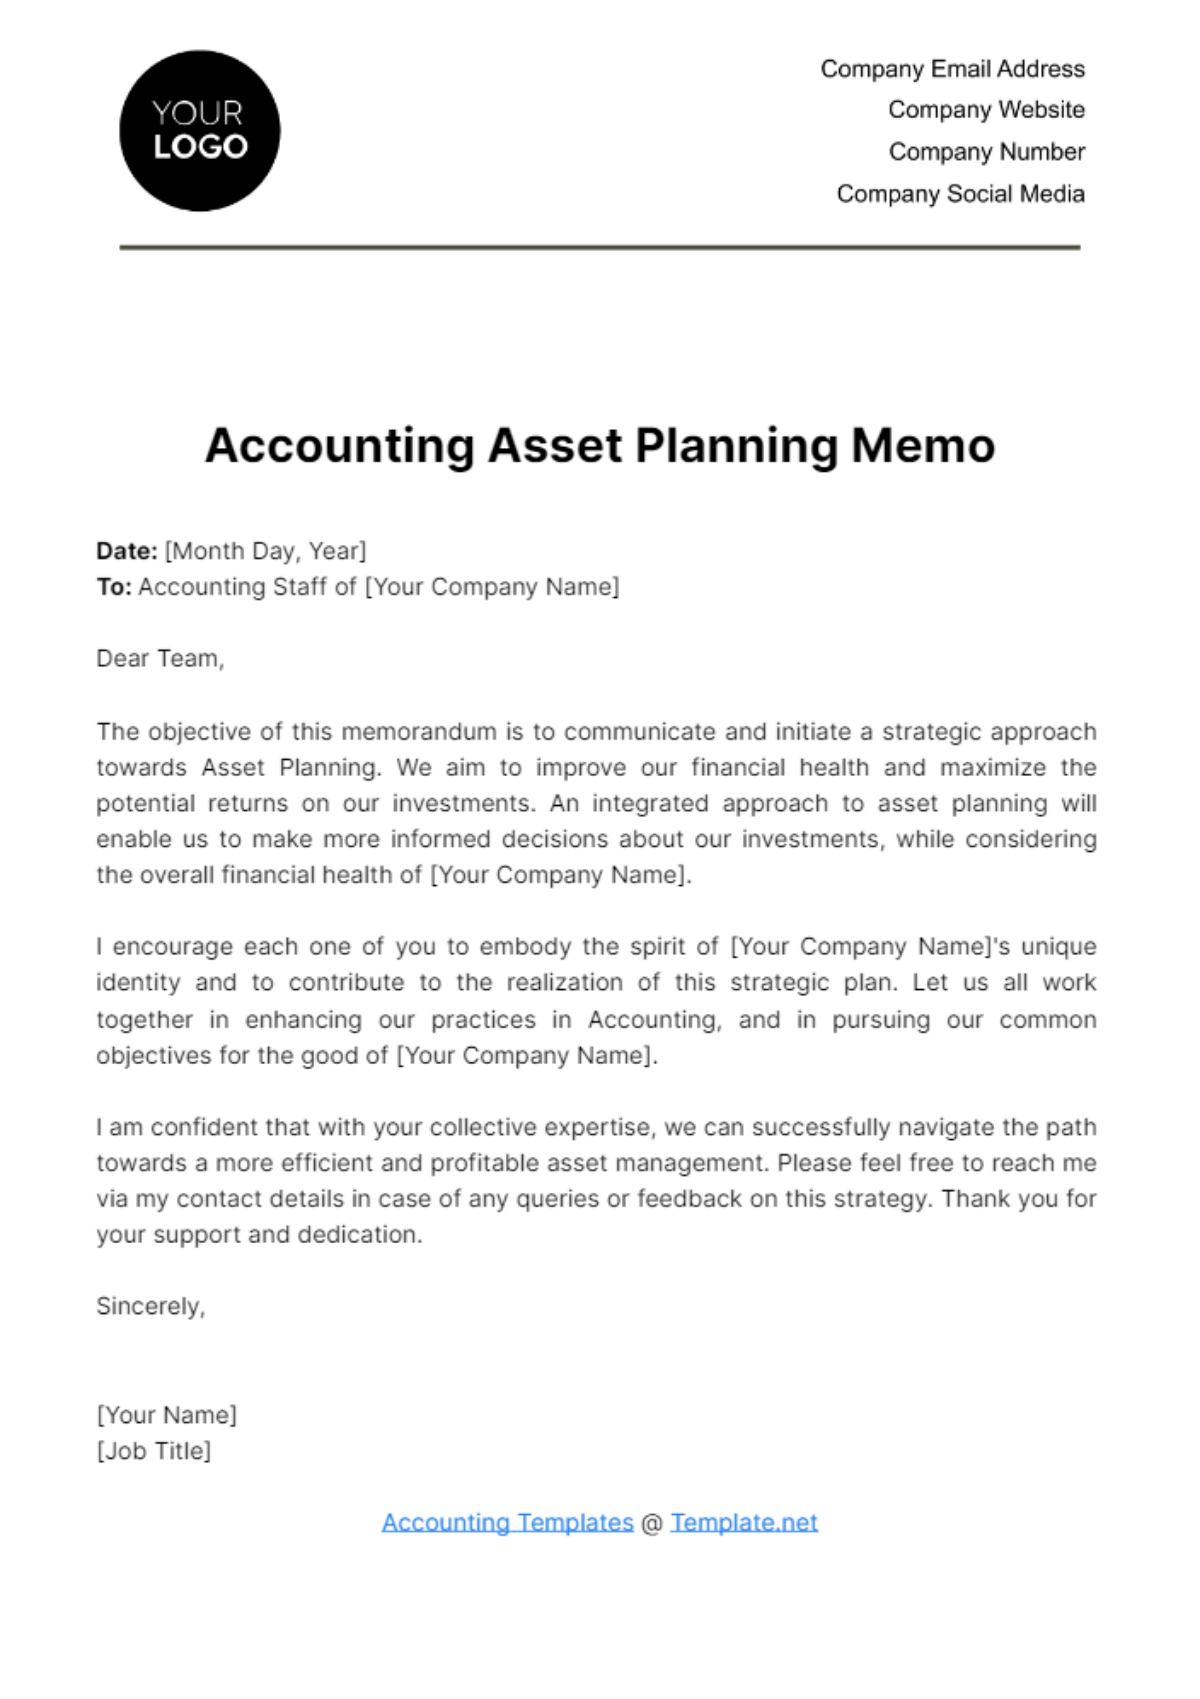 Accounting Asset Planning Memo Template